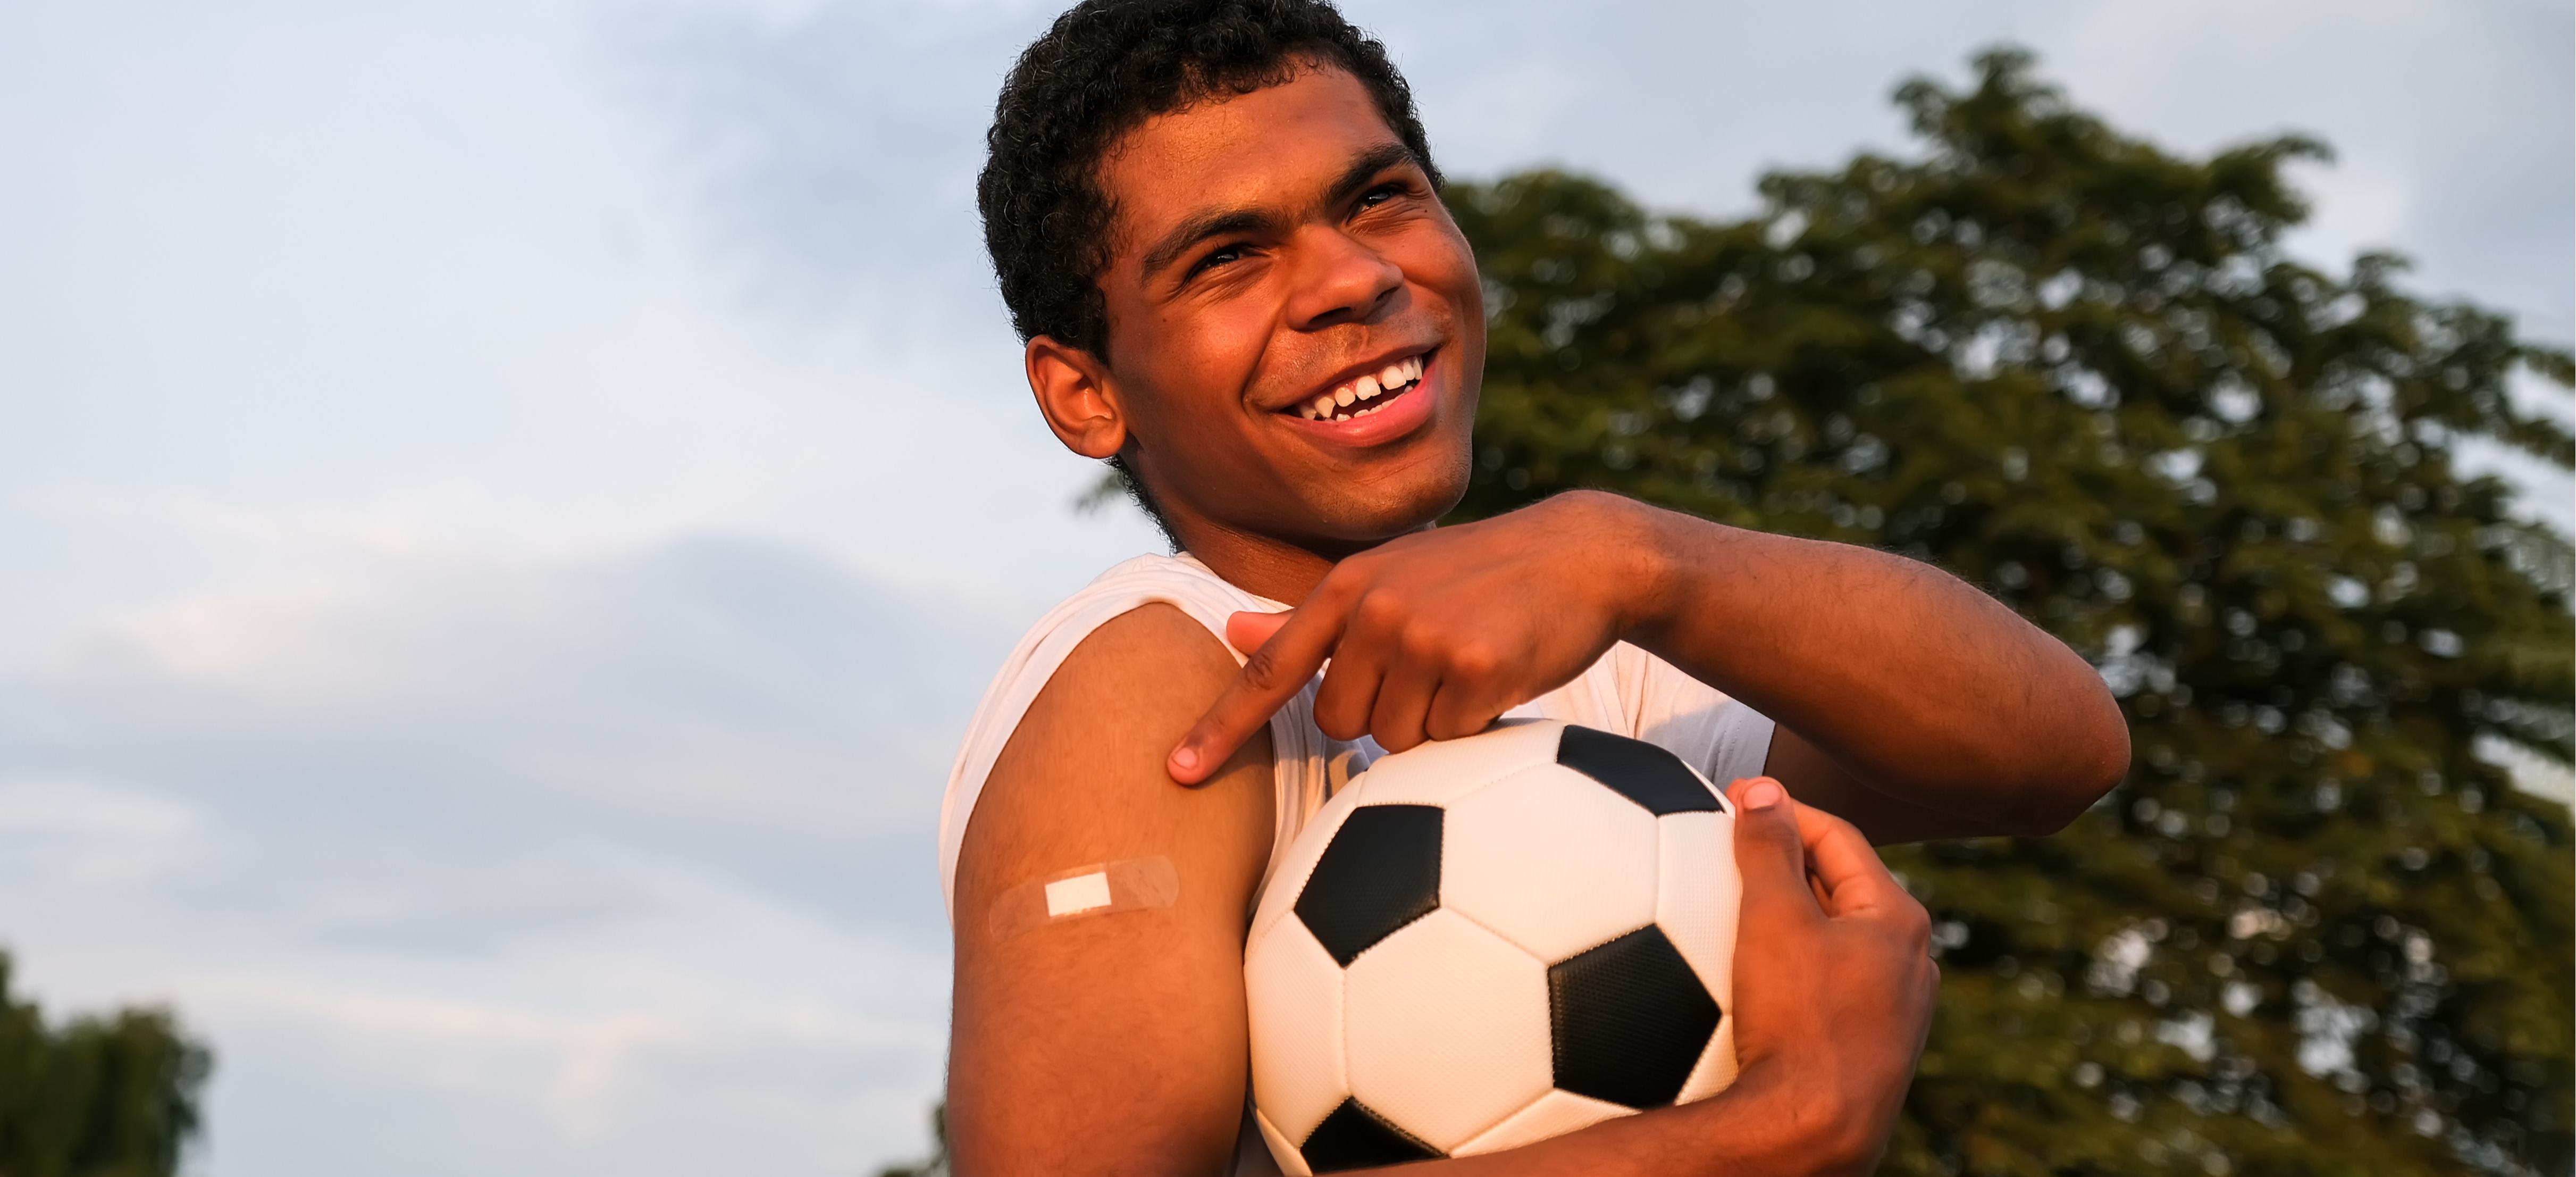 Vaccinated teenage boy smiling holding soccer ball